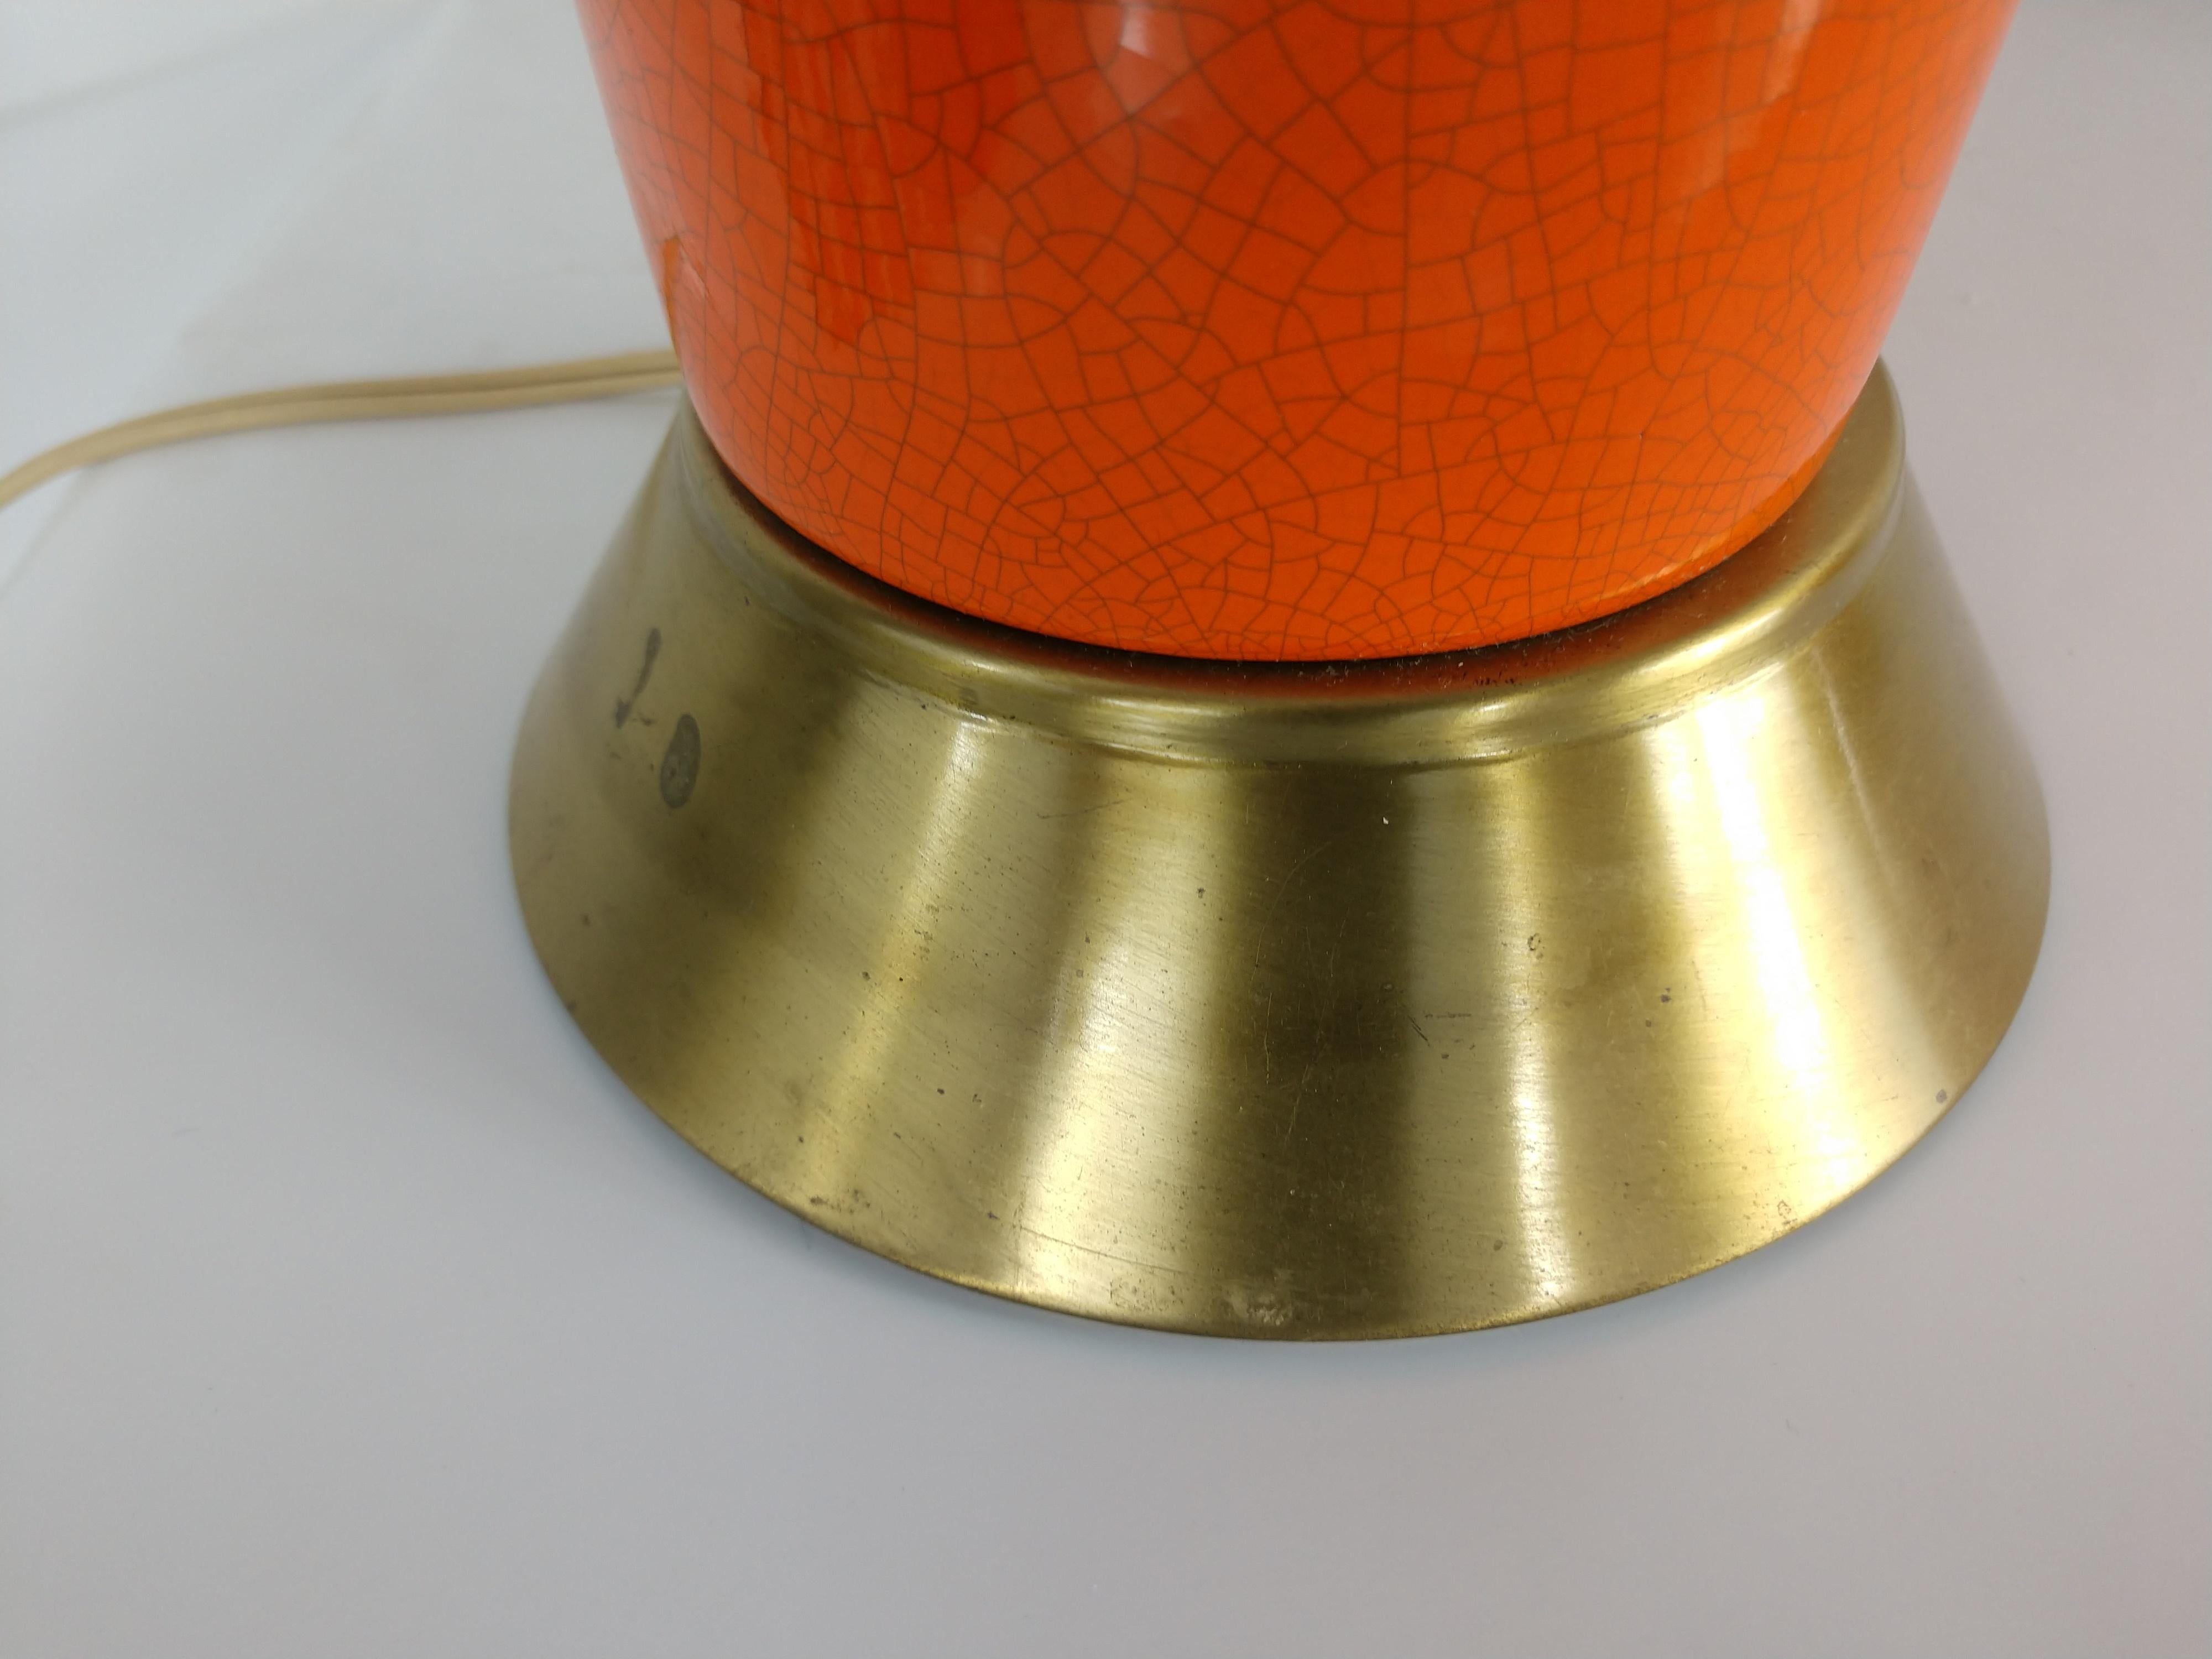 Pair of Mid-Century Modern Table Lamps with Orange Crackle Glaze, C1958 For Sale 1